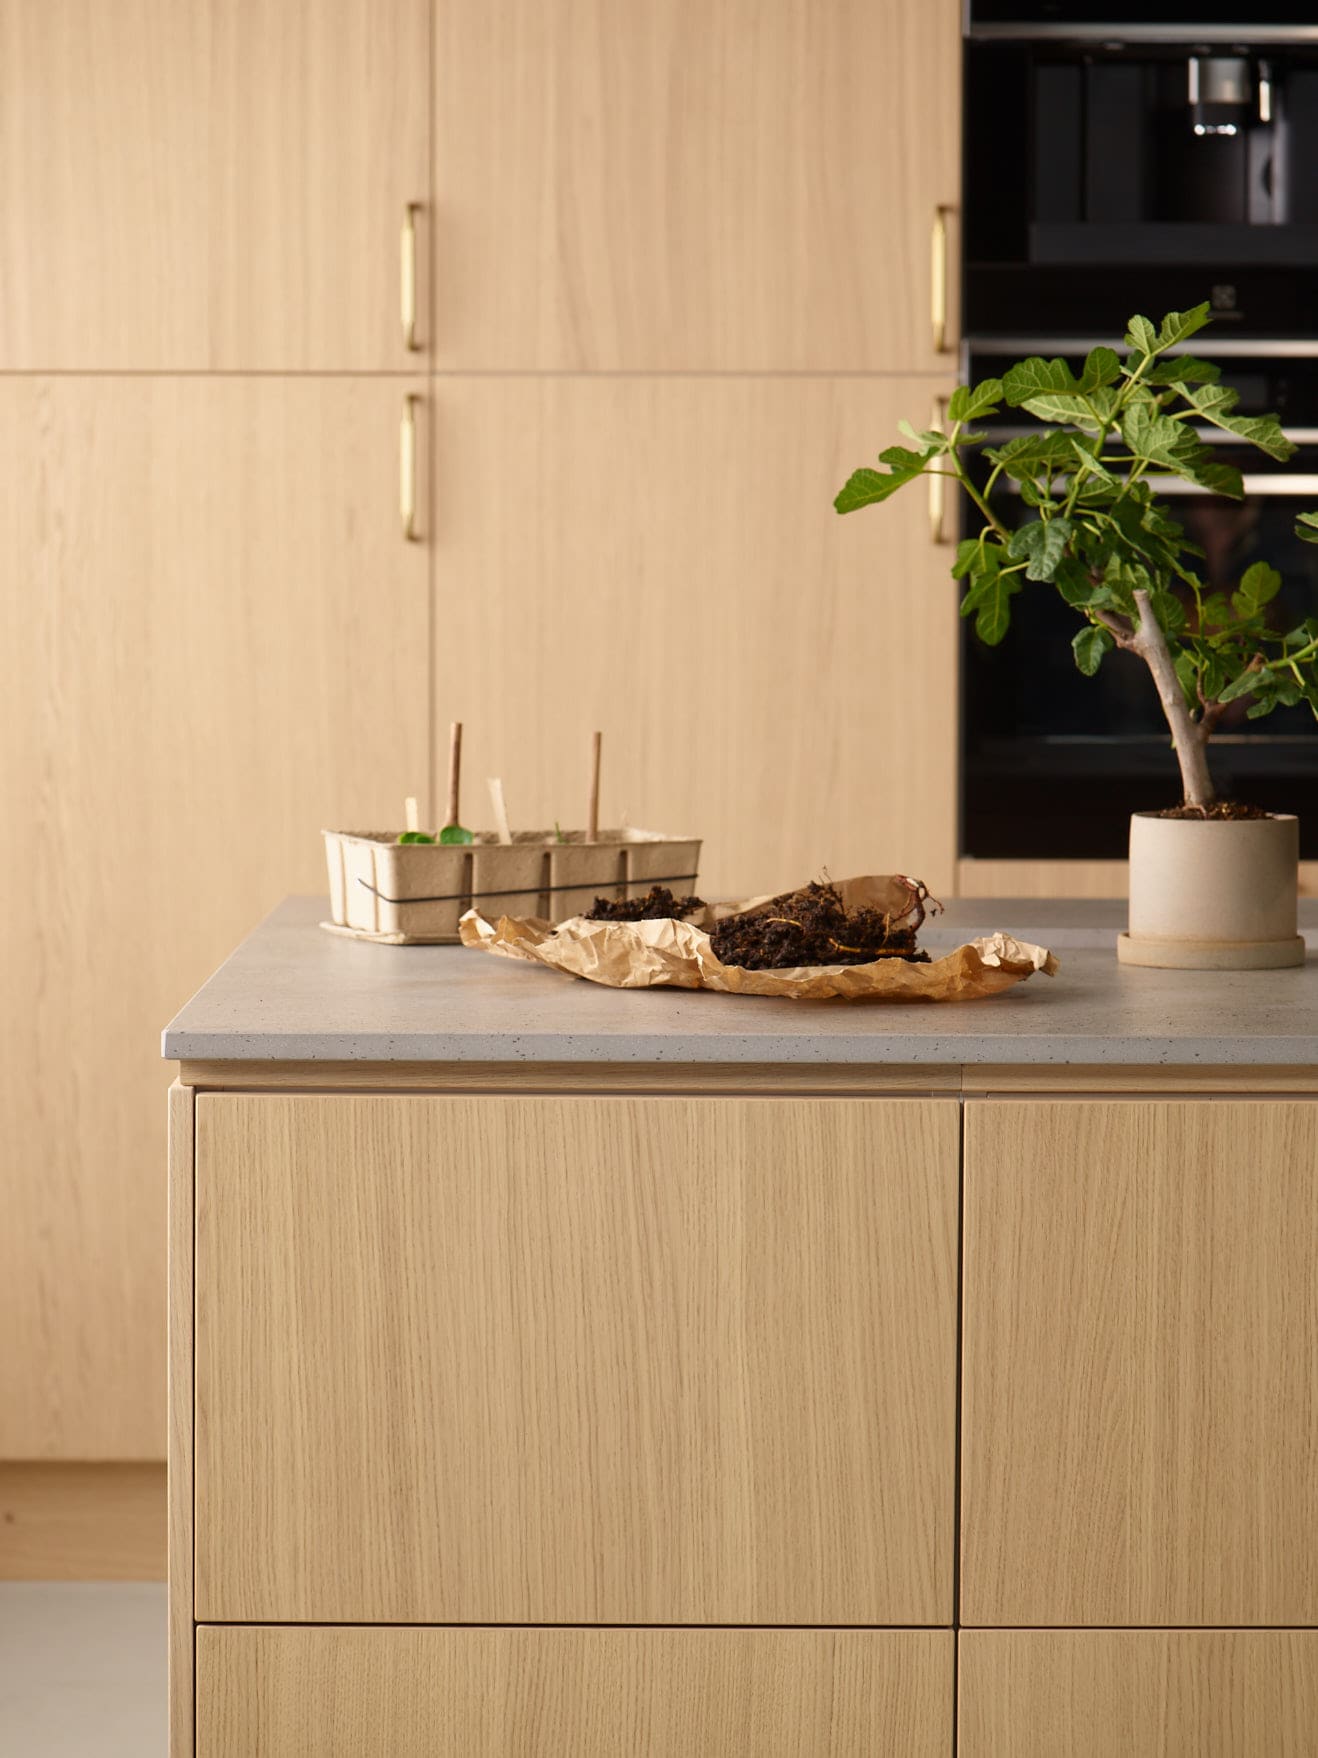 Wooden kitchen with a grey wotktop and food on it